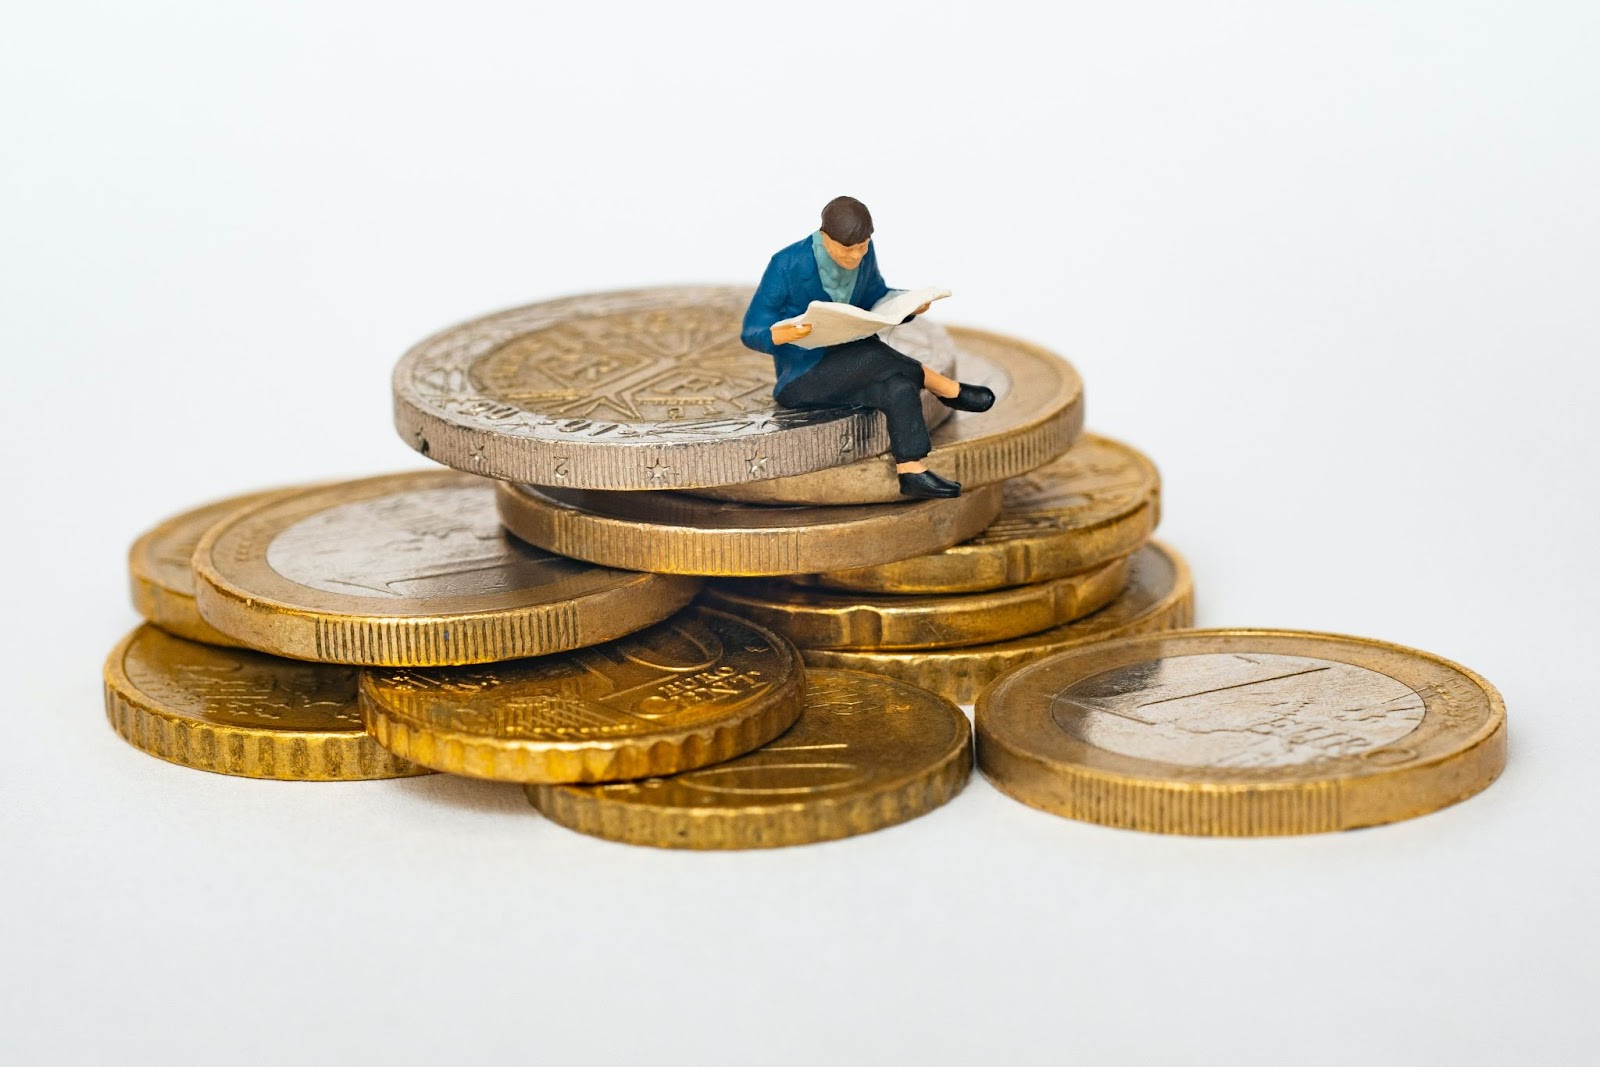 Small figurine reading a paper on a stack of coins